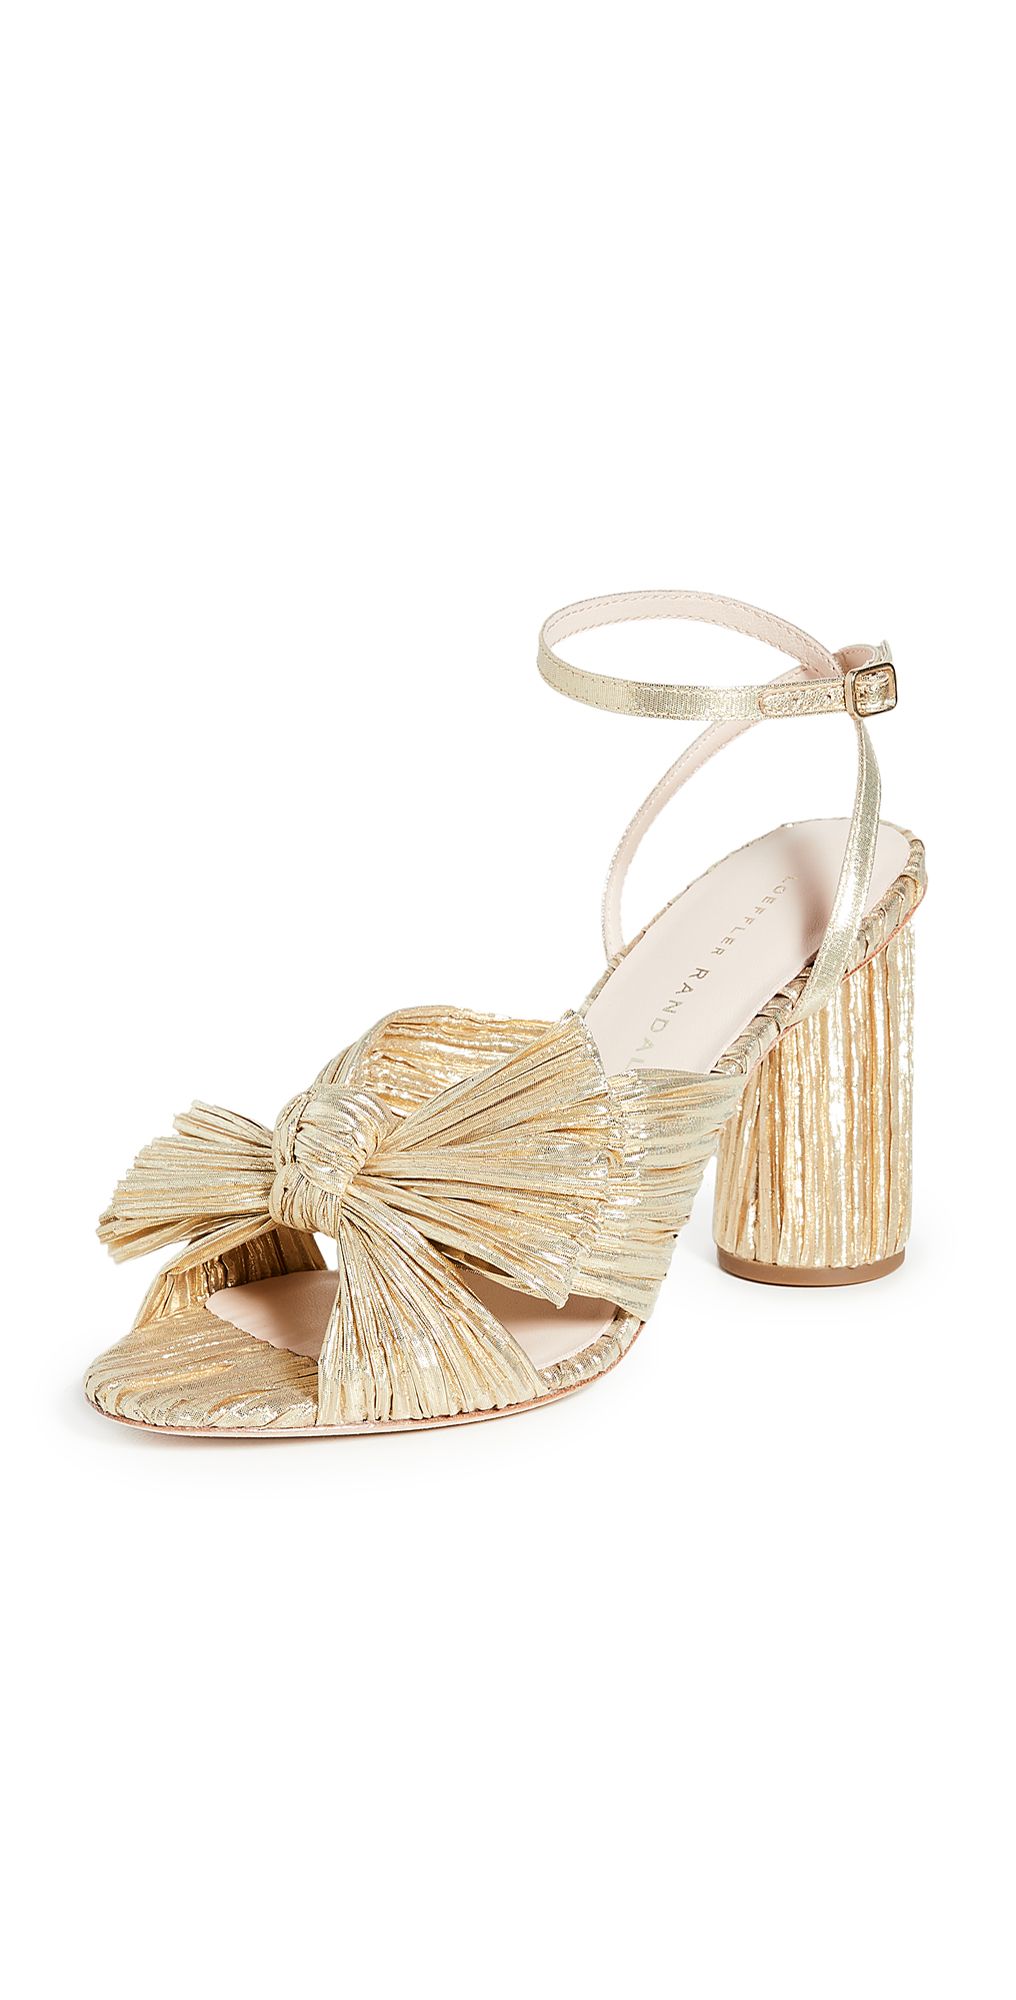 Loeffler Randall Camellia Gold Pleated Bow Heel with Ankle Strap | Shopbop